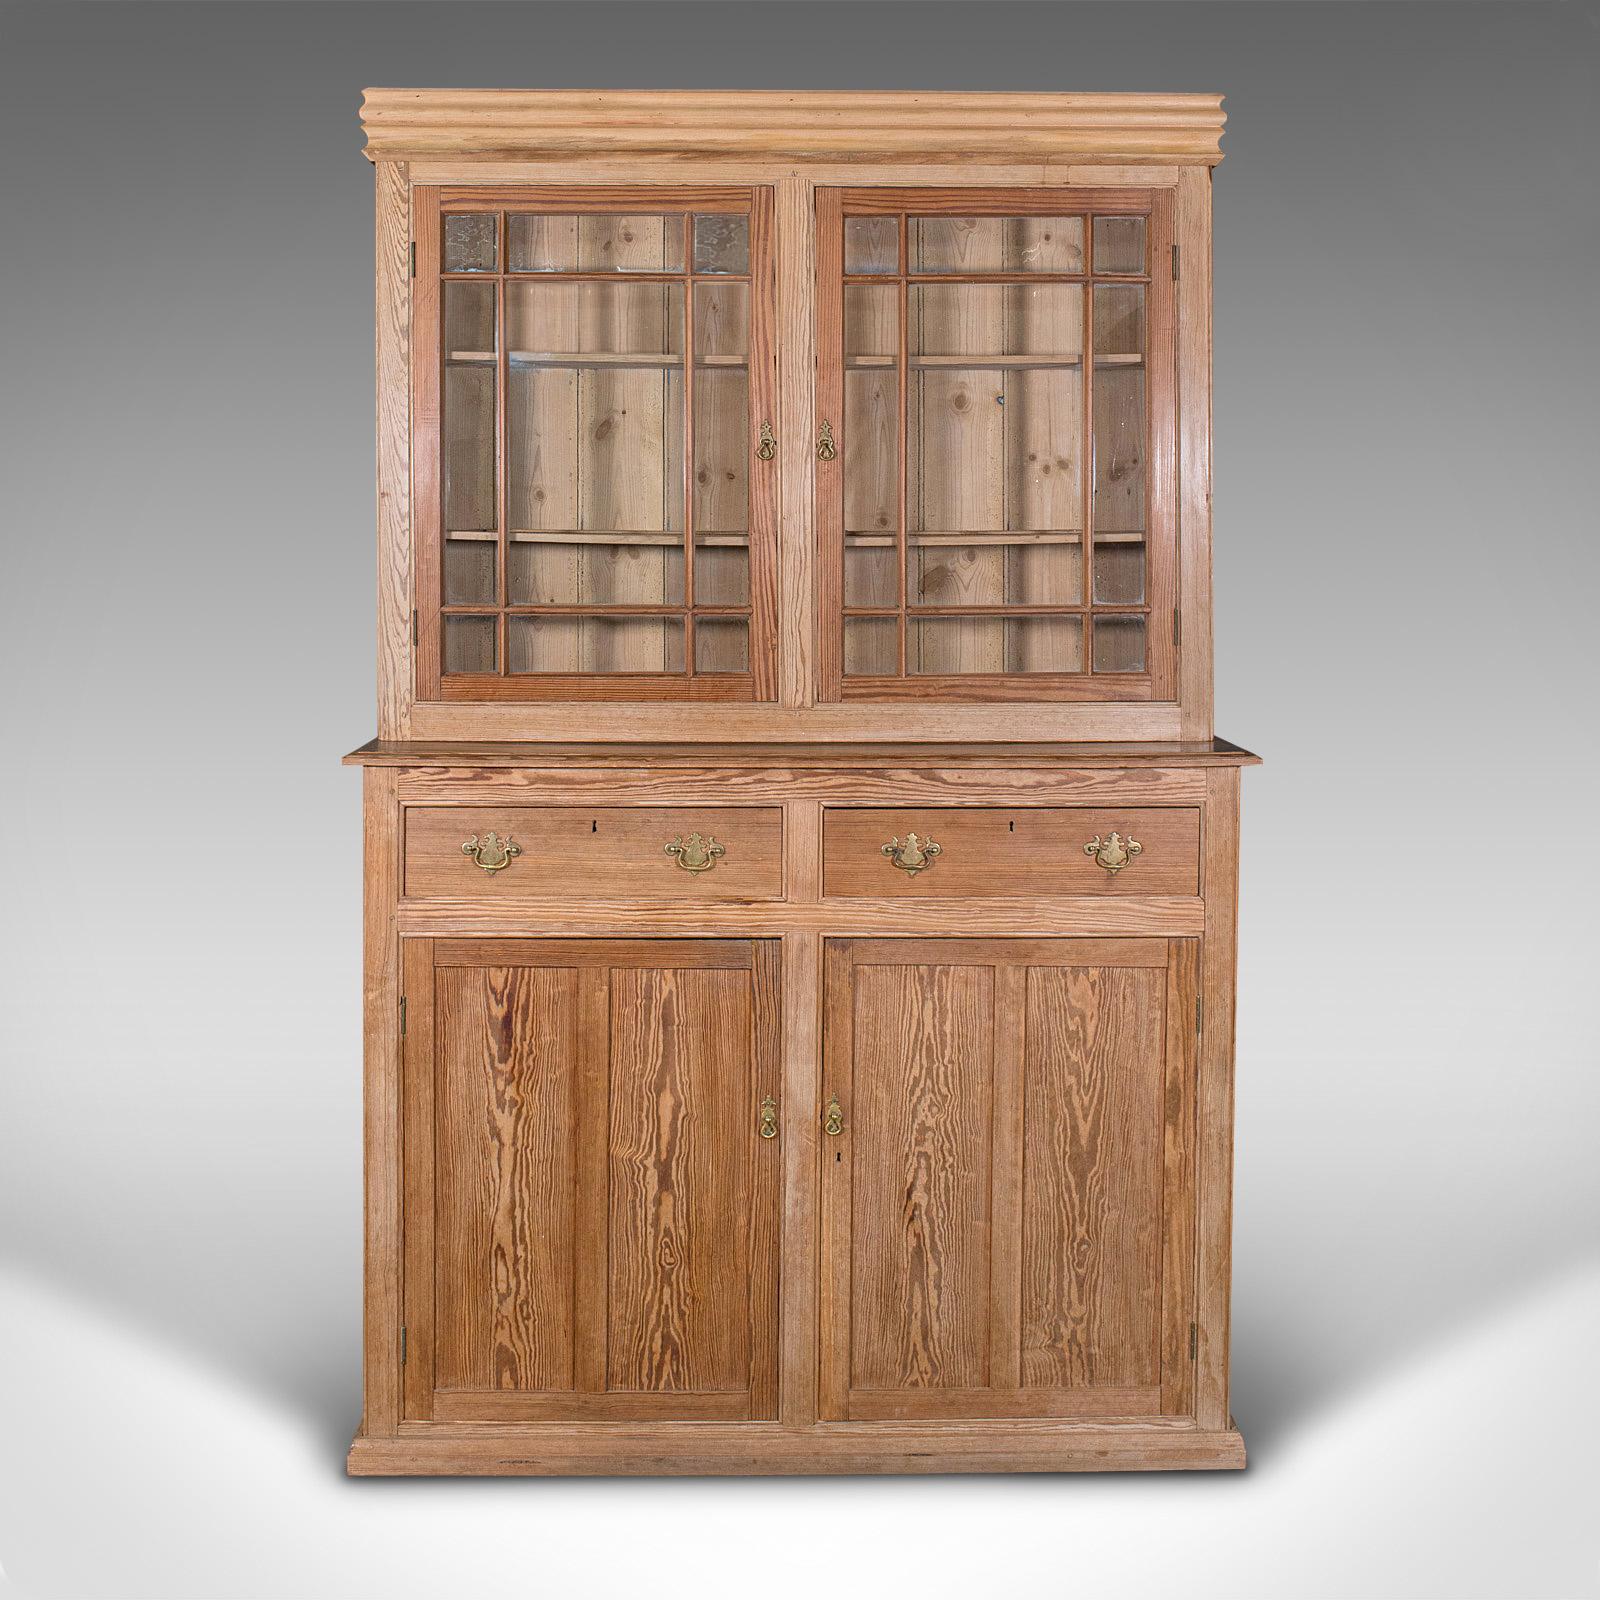 This is a very tall antique glazed cupboard. An English, pine sideboard dresser or larder cabinet, dating to the early Victorian period, circa 1850.

Of townhouse or country estate proportion at 8' 03